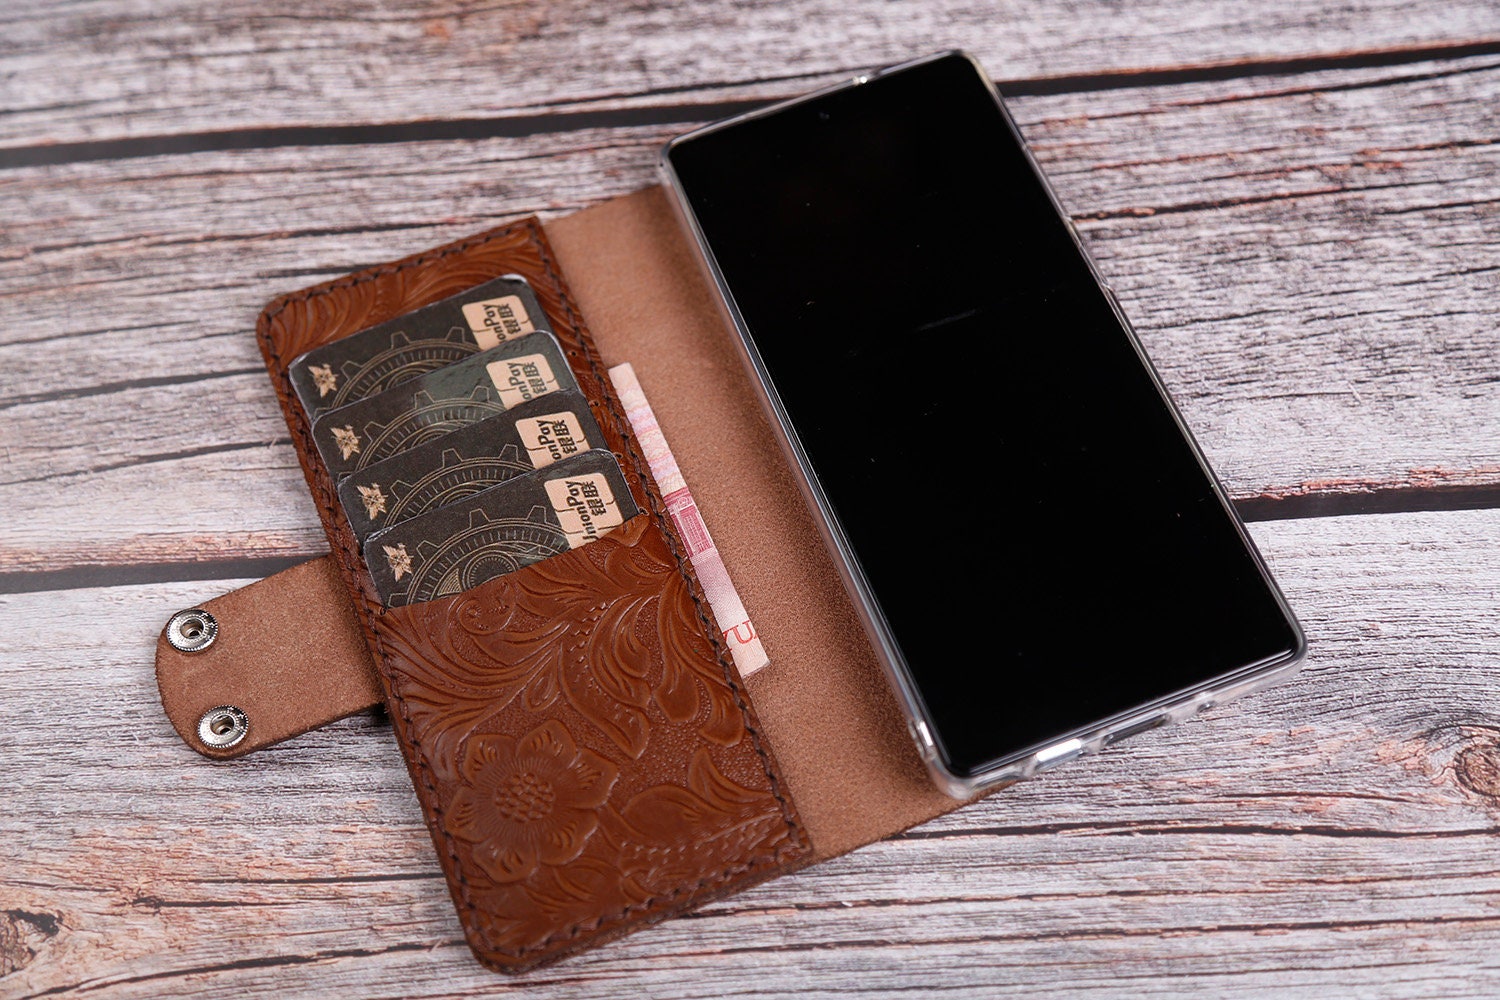 Men/'s Google Pixel3 2 xl2 5432 xl leather case wallet Handmade Leather Personalized Leather Monogram Leather Yellowish brown